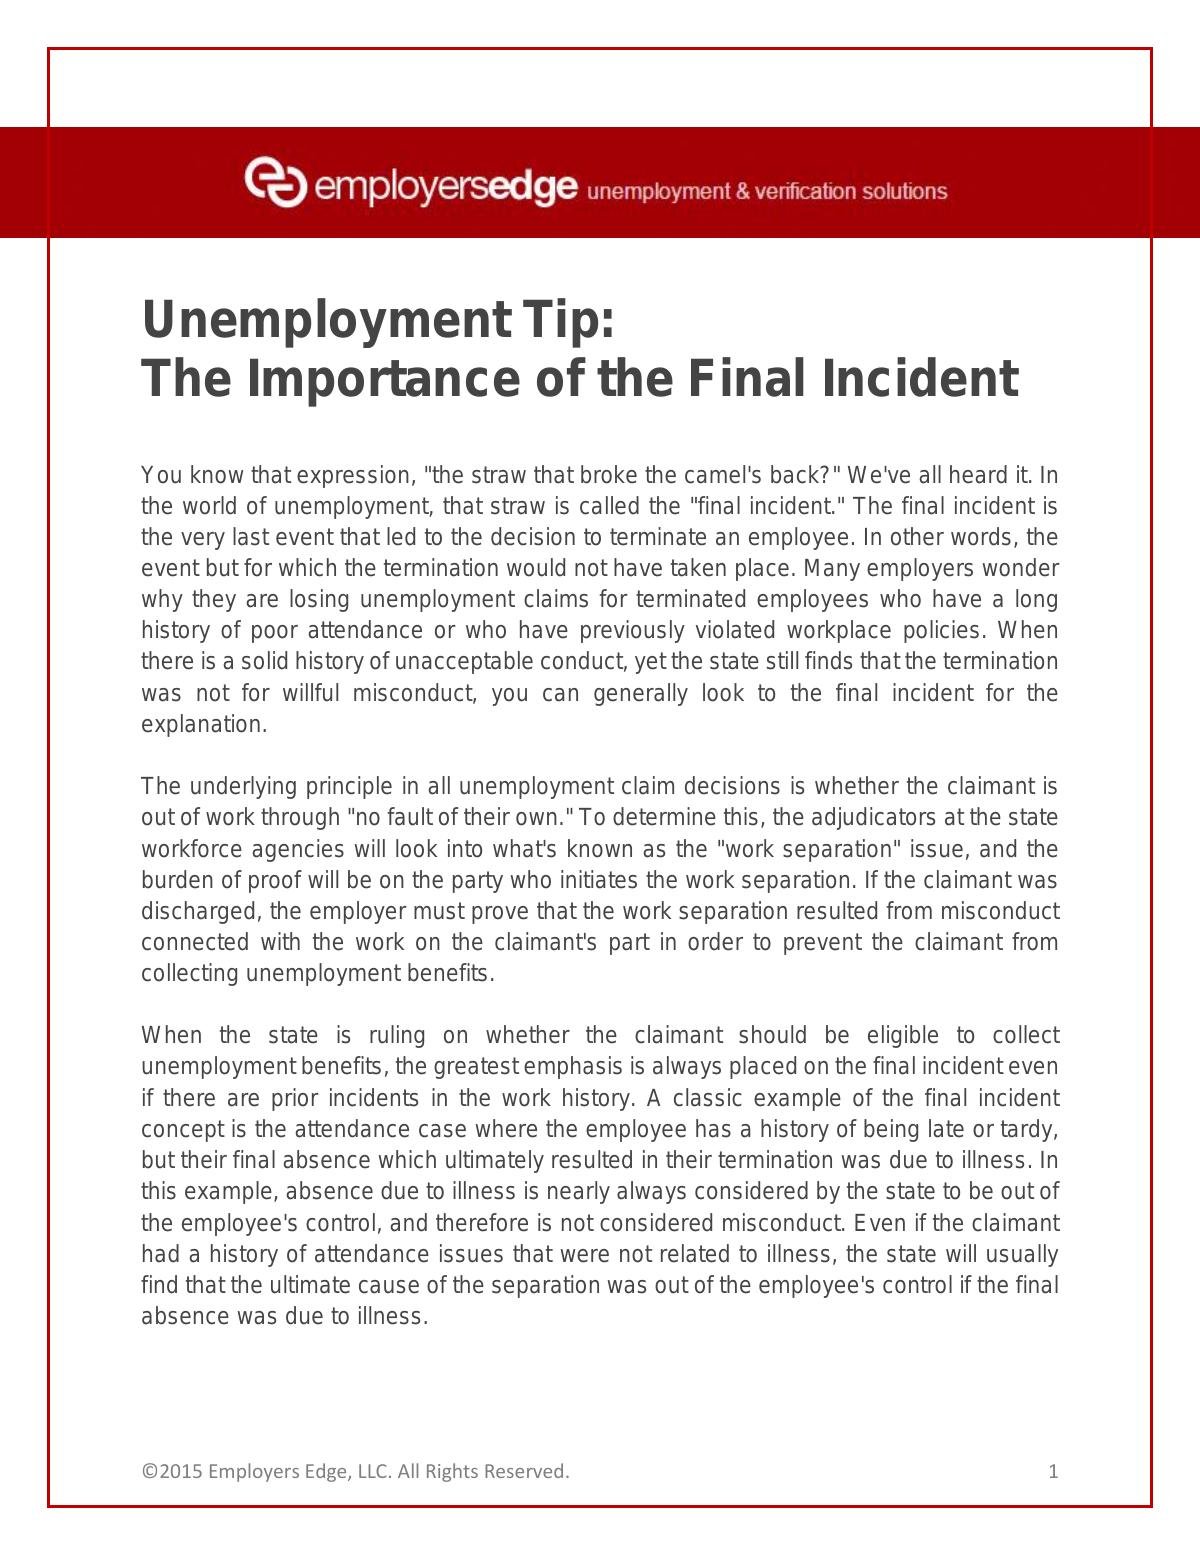 Unemployment Tip - The Importance of the Final Incident